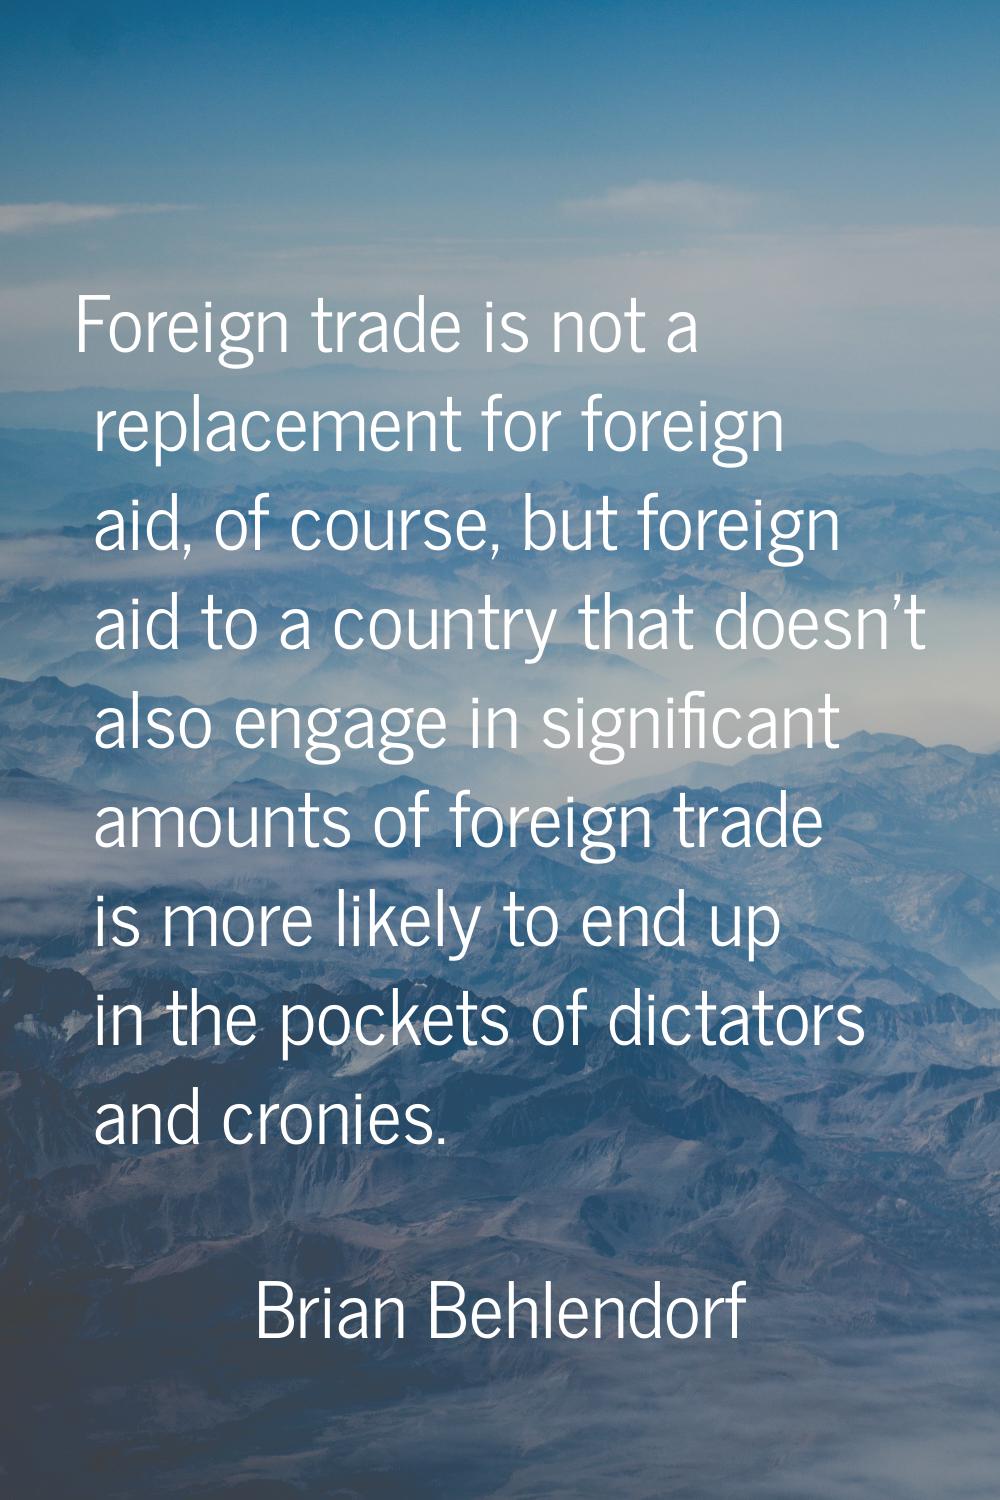 Foreign trade is not a replacement for foreign aid, of course, but foreign aid to a country that do